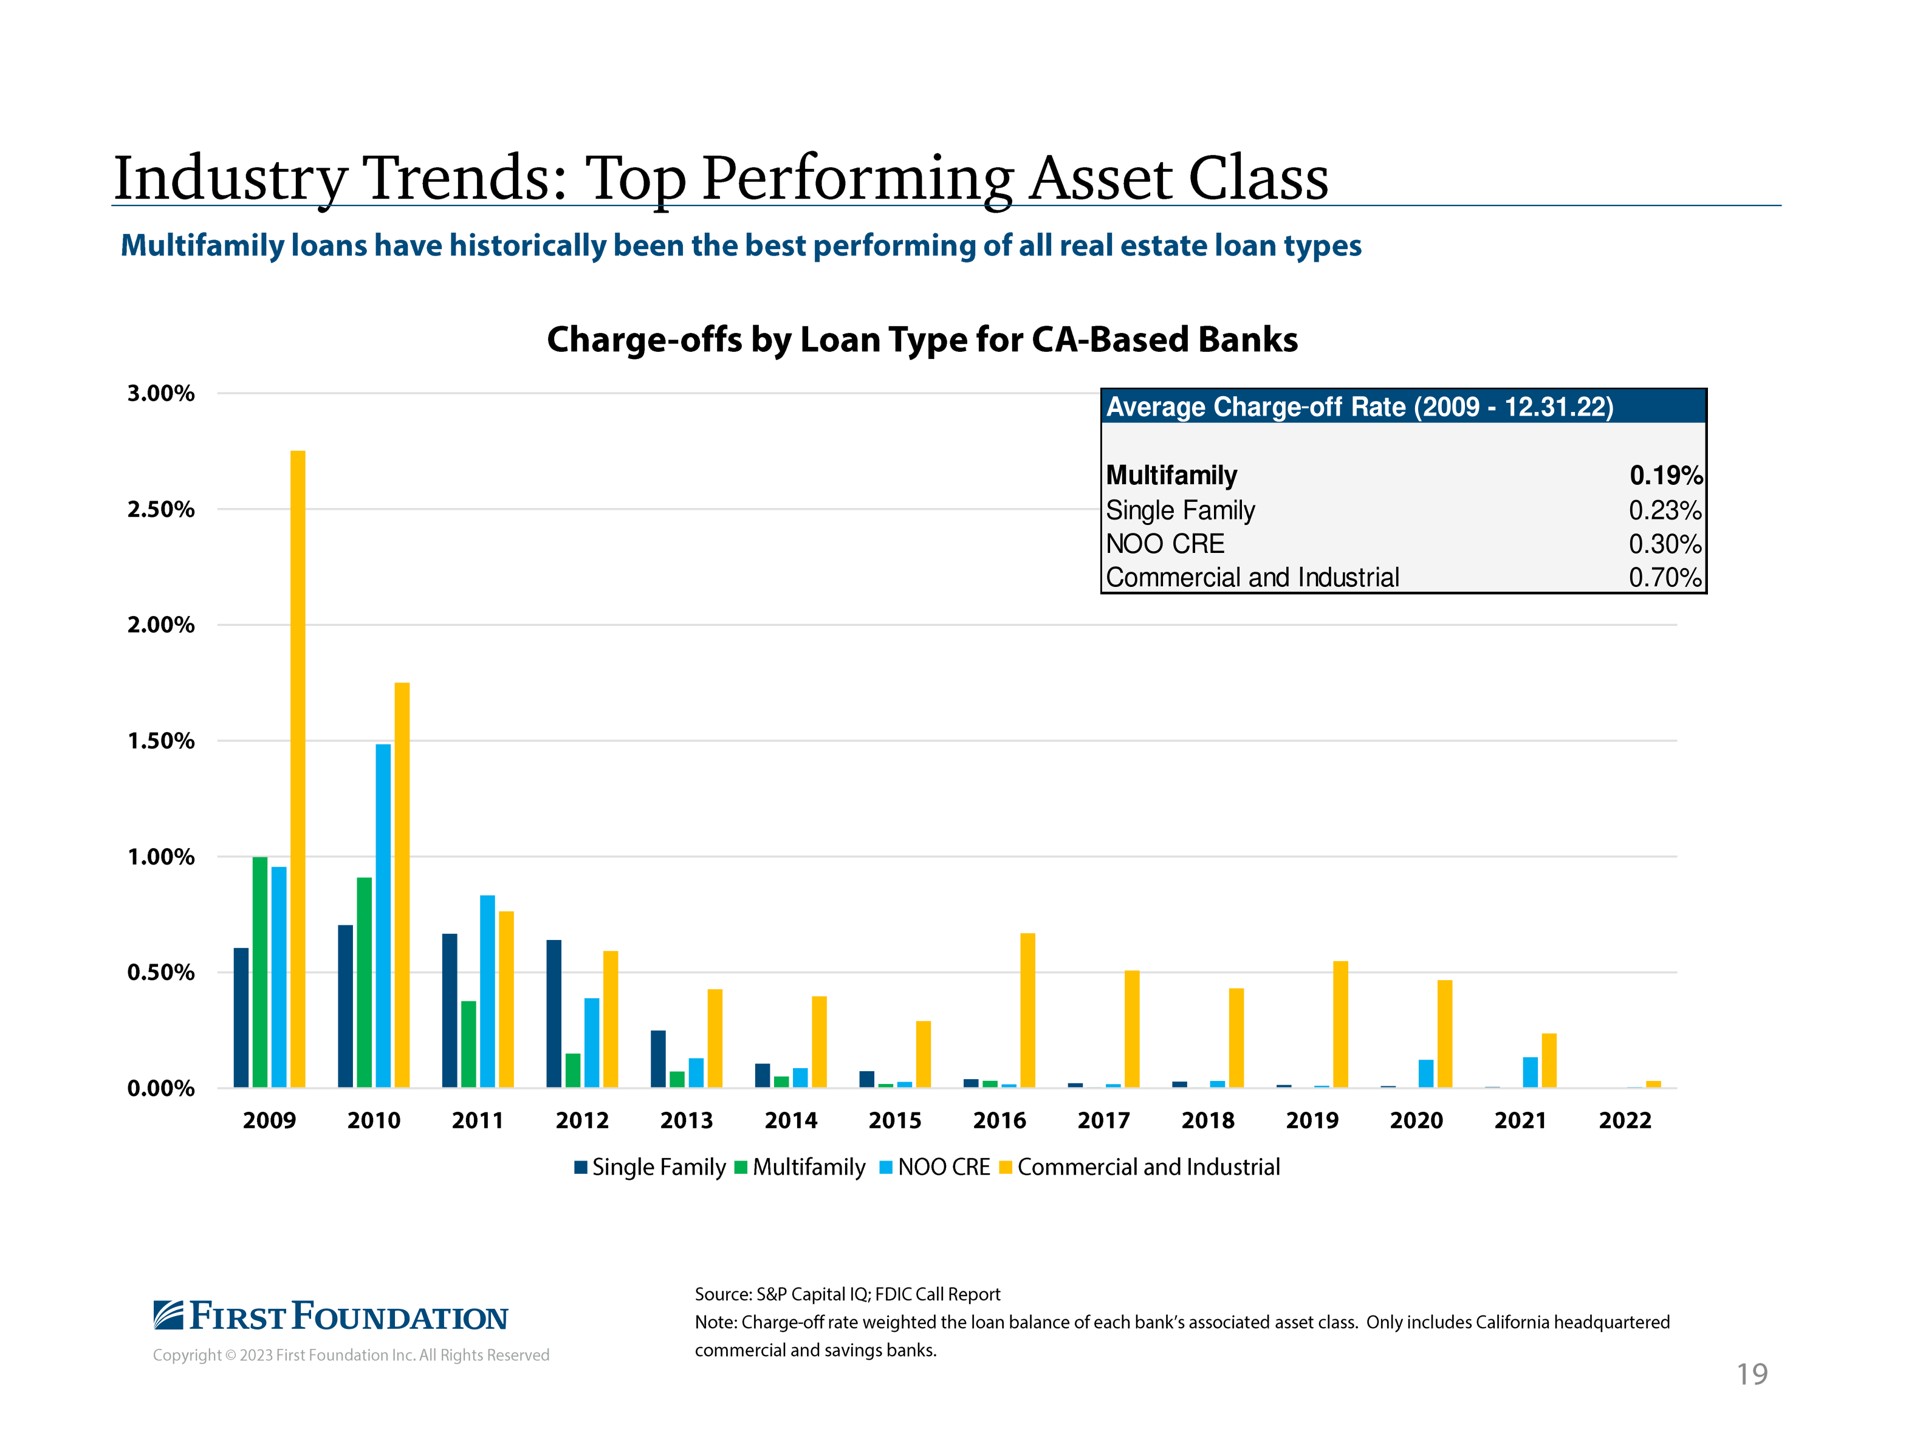 industry trends top performing asset class average charge off rate | First Foundation